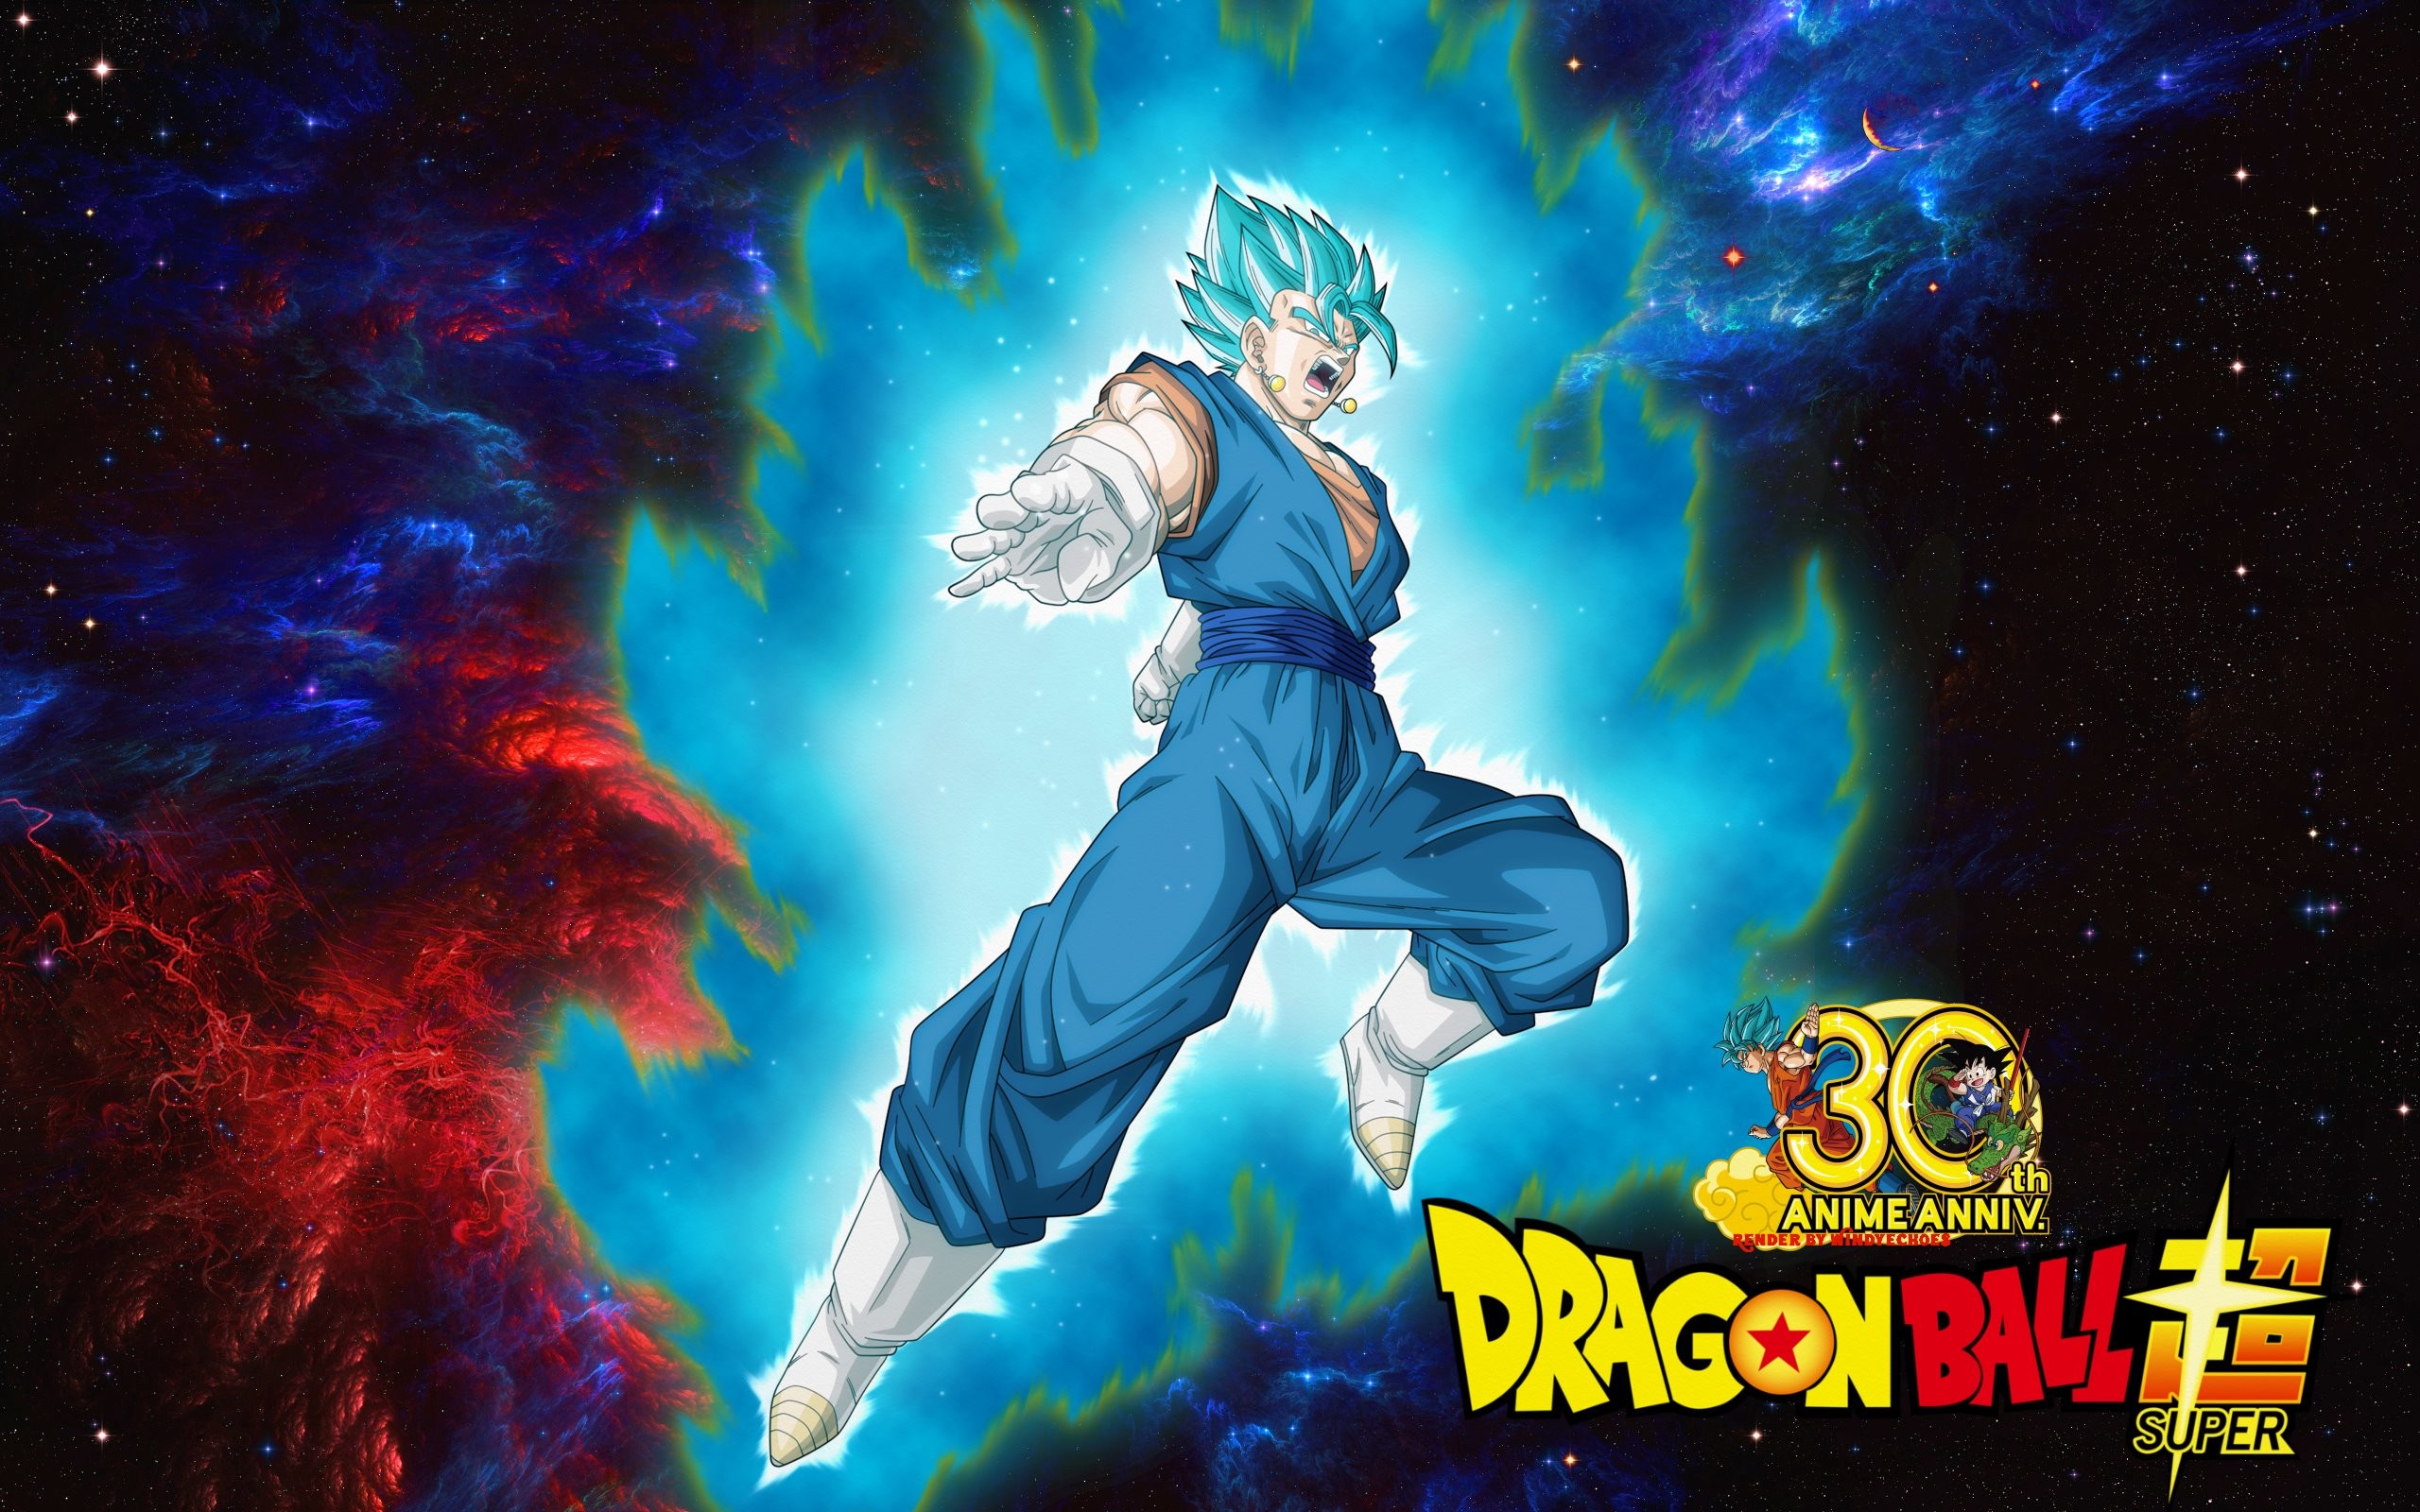 Dragon Ball Super 30th Anniversary Wallpaper # 1 by WindyEchoes on